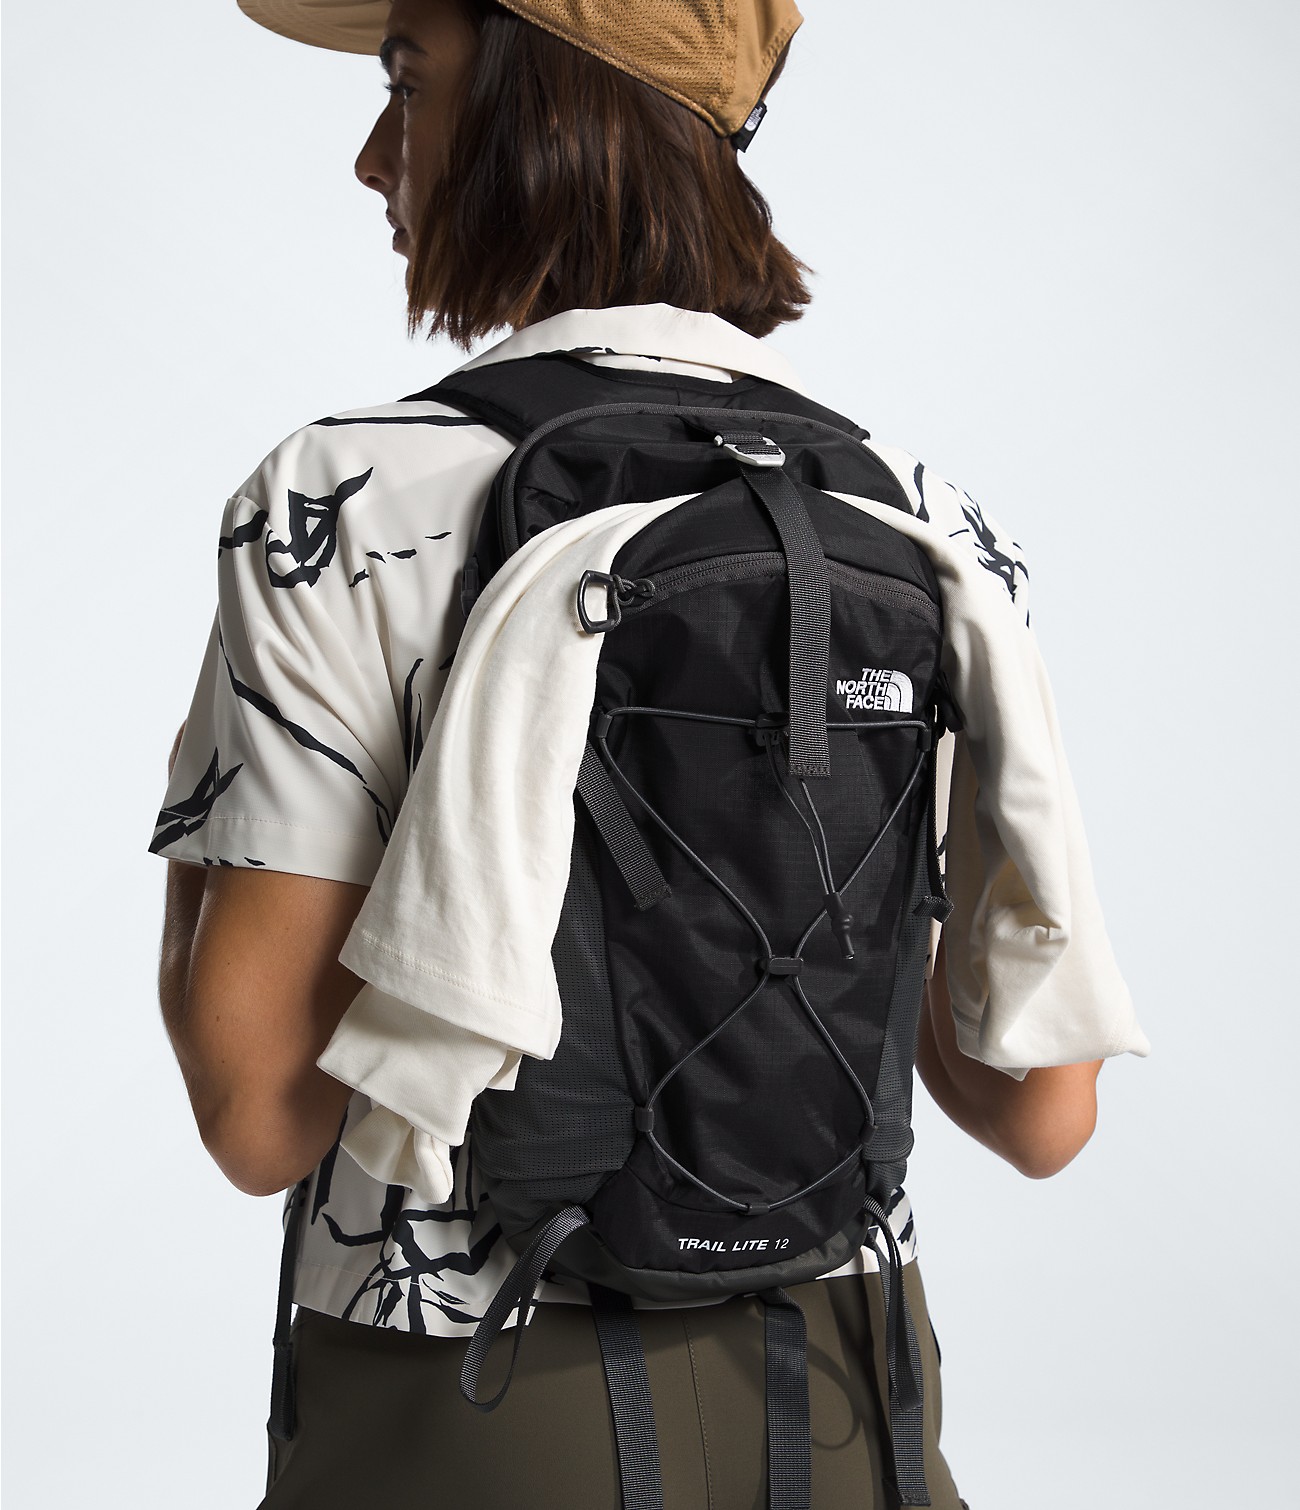 Trail Lite 12 Backpack | The North Face